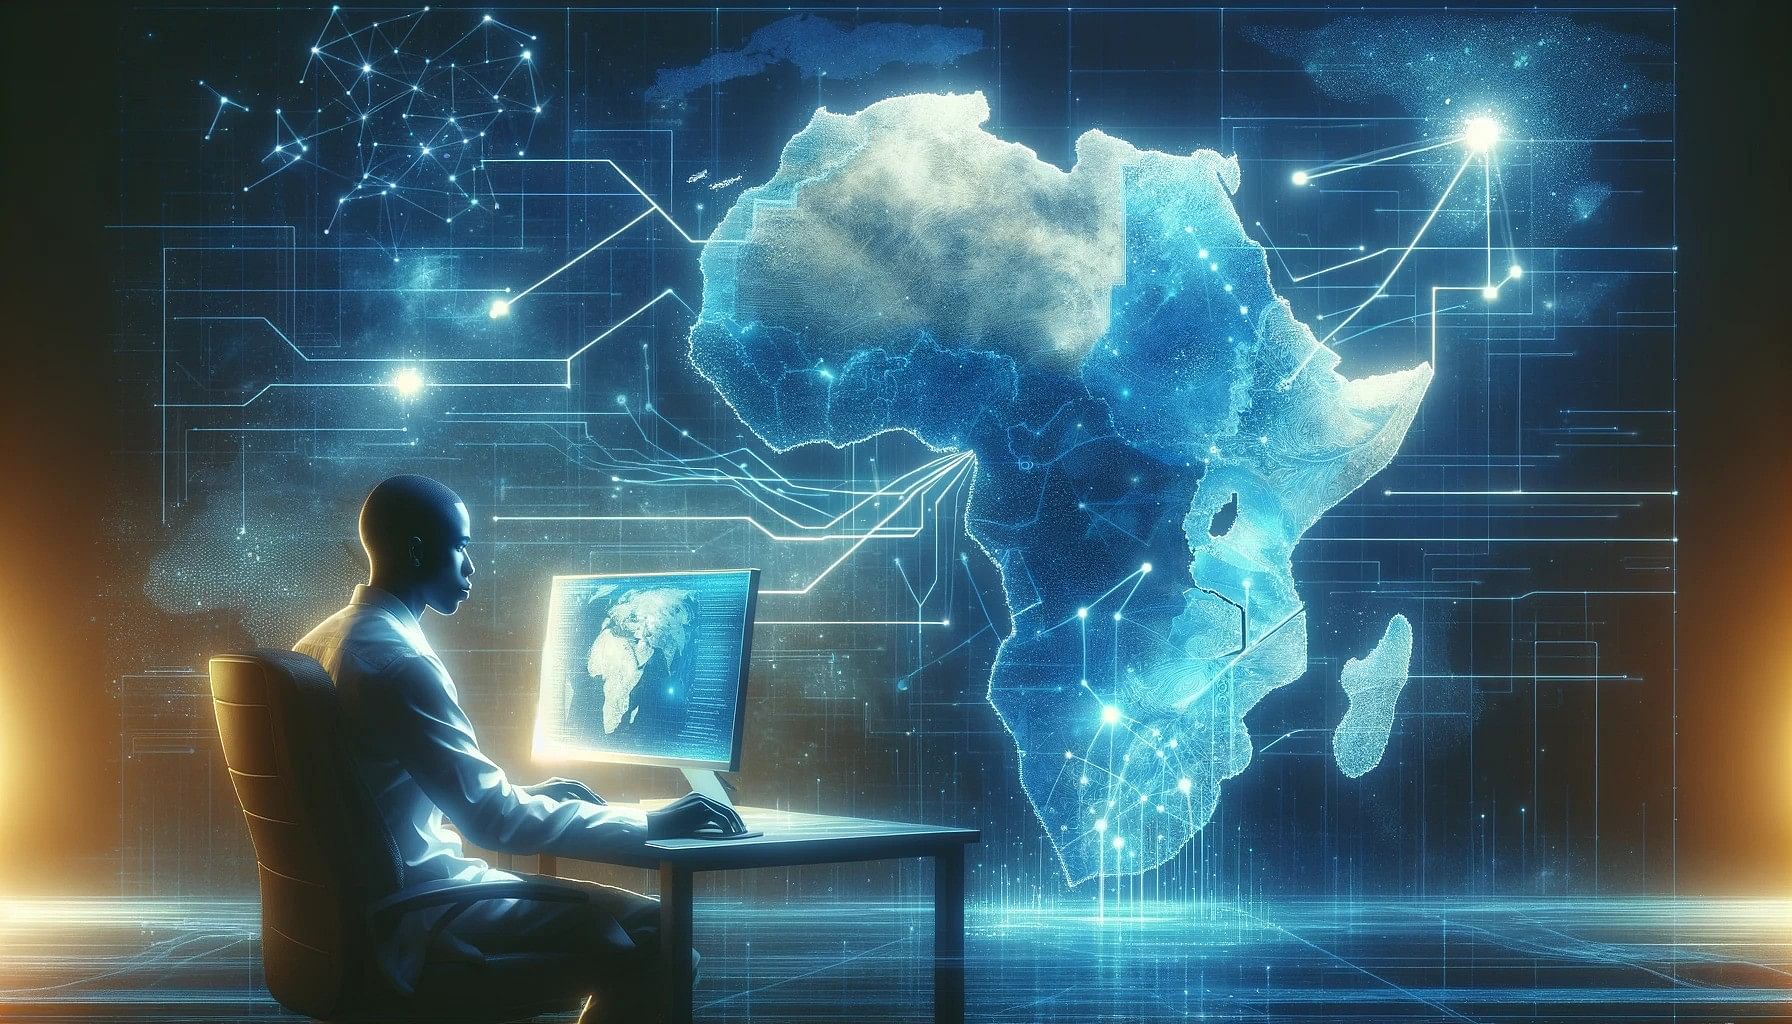 African Scientist and Map of Africa